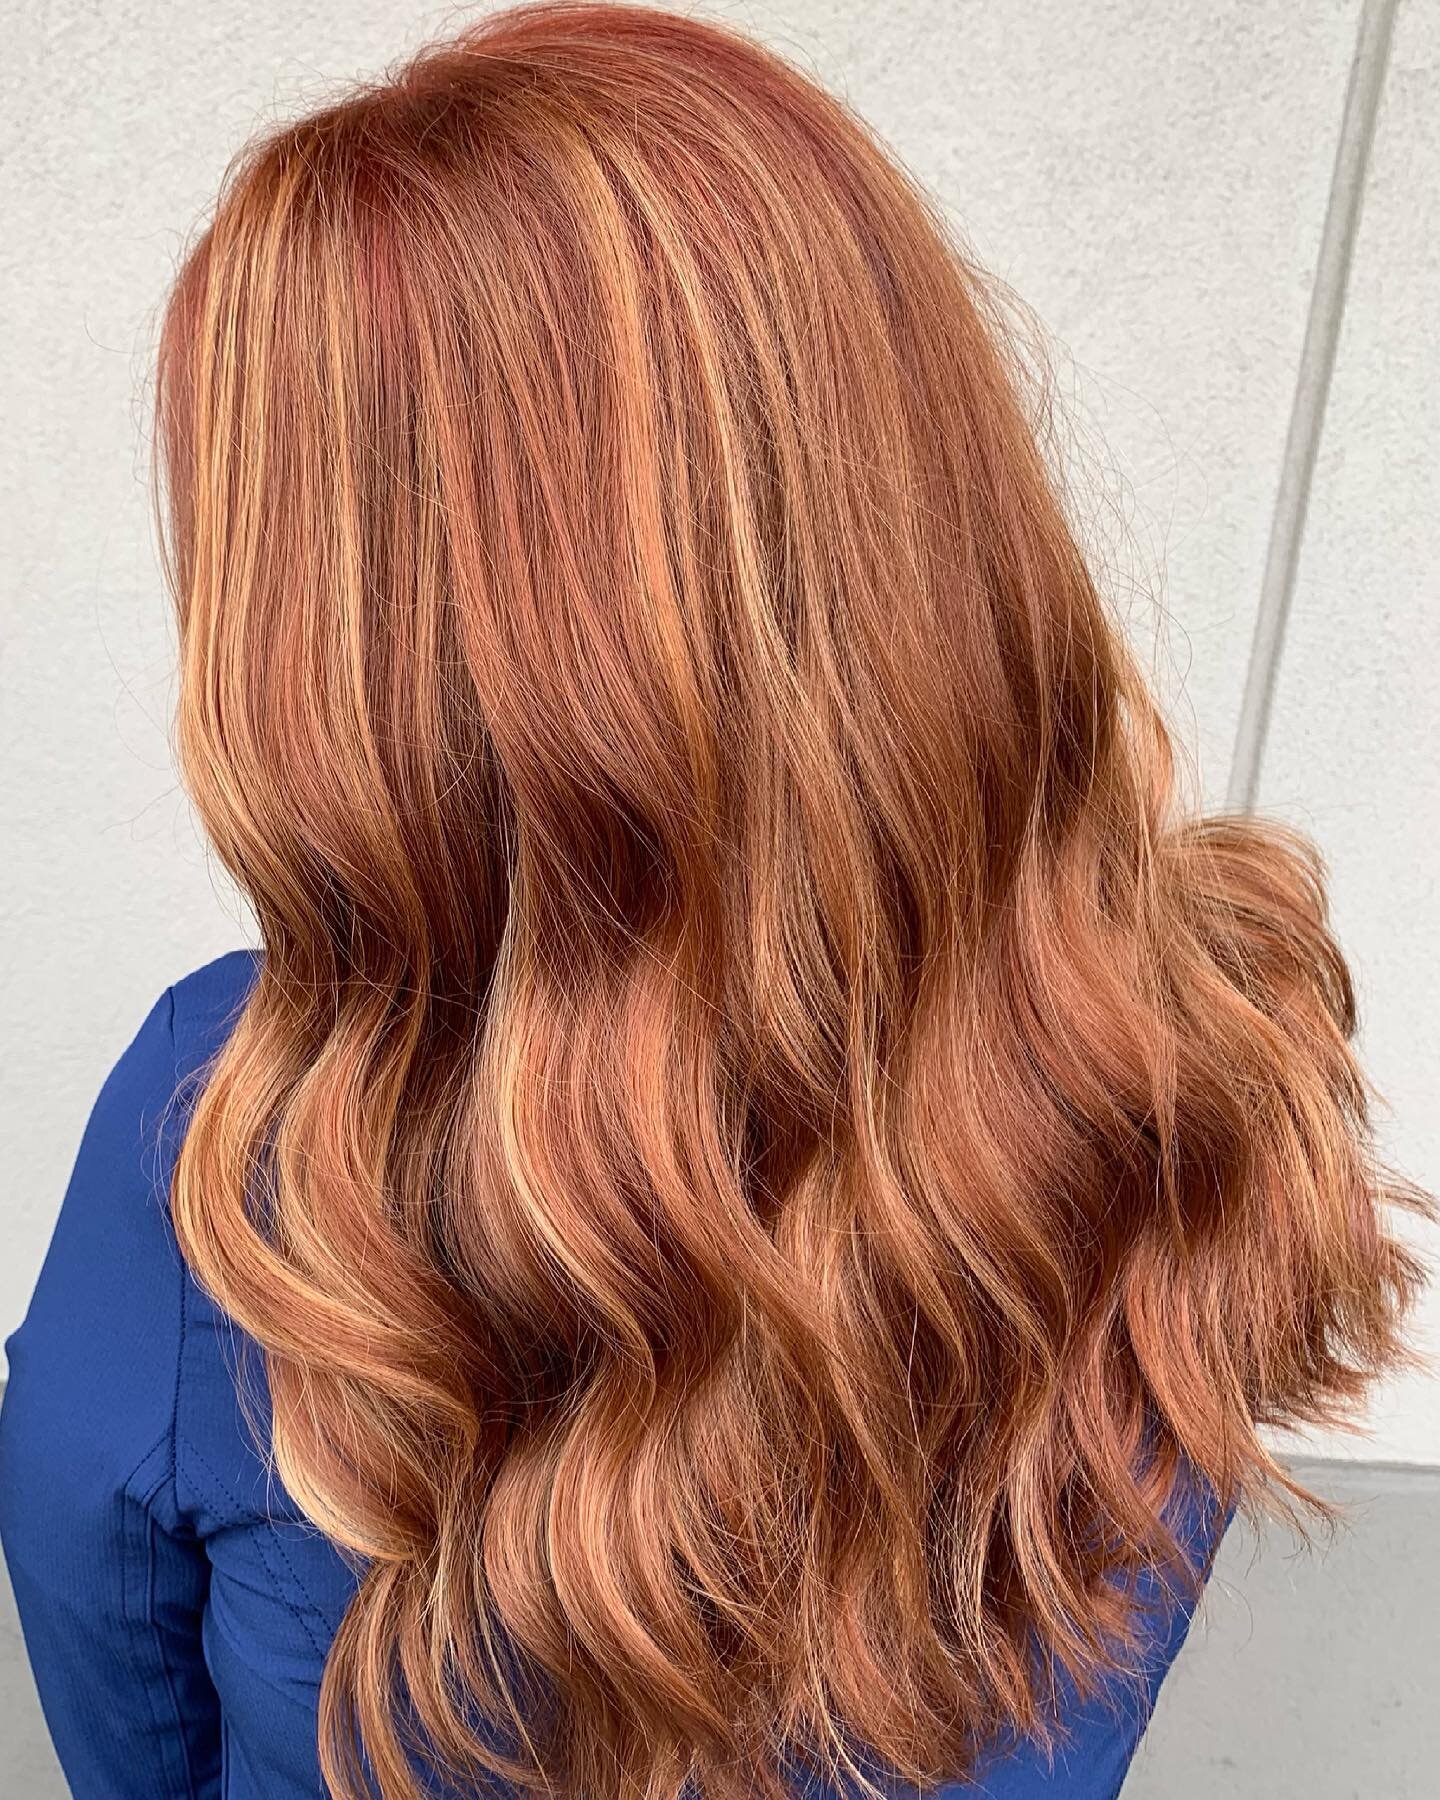 Talk about dimension!!! This red color slaps 👋👋👋 cut &amp; color by @hairbyallieryan